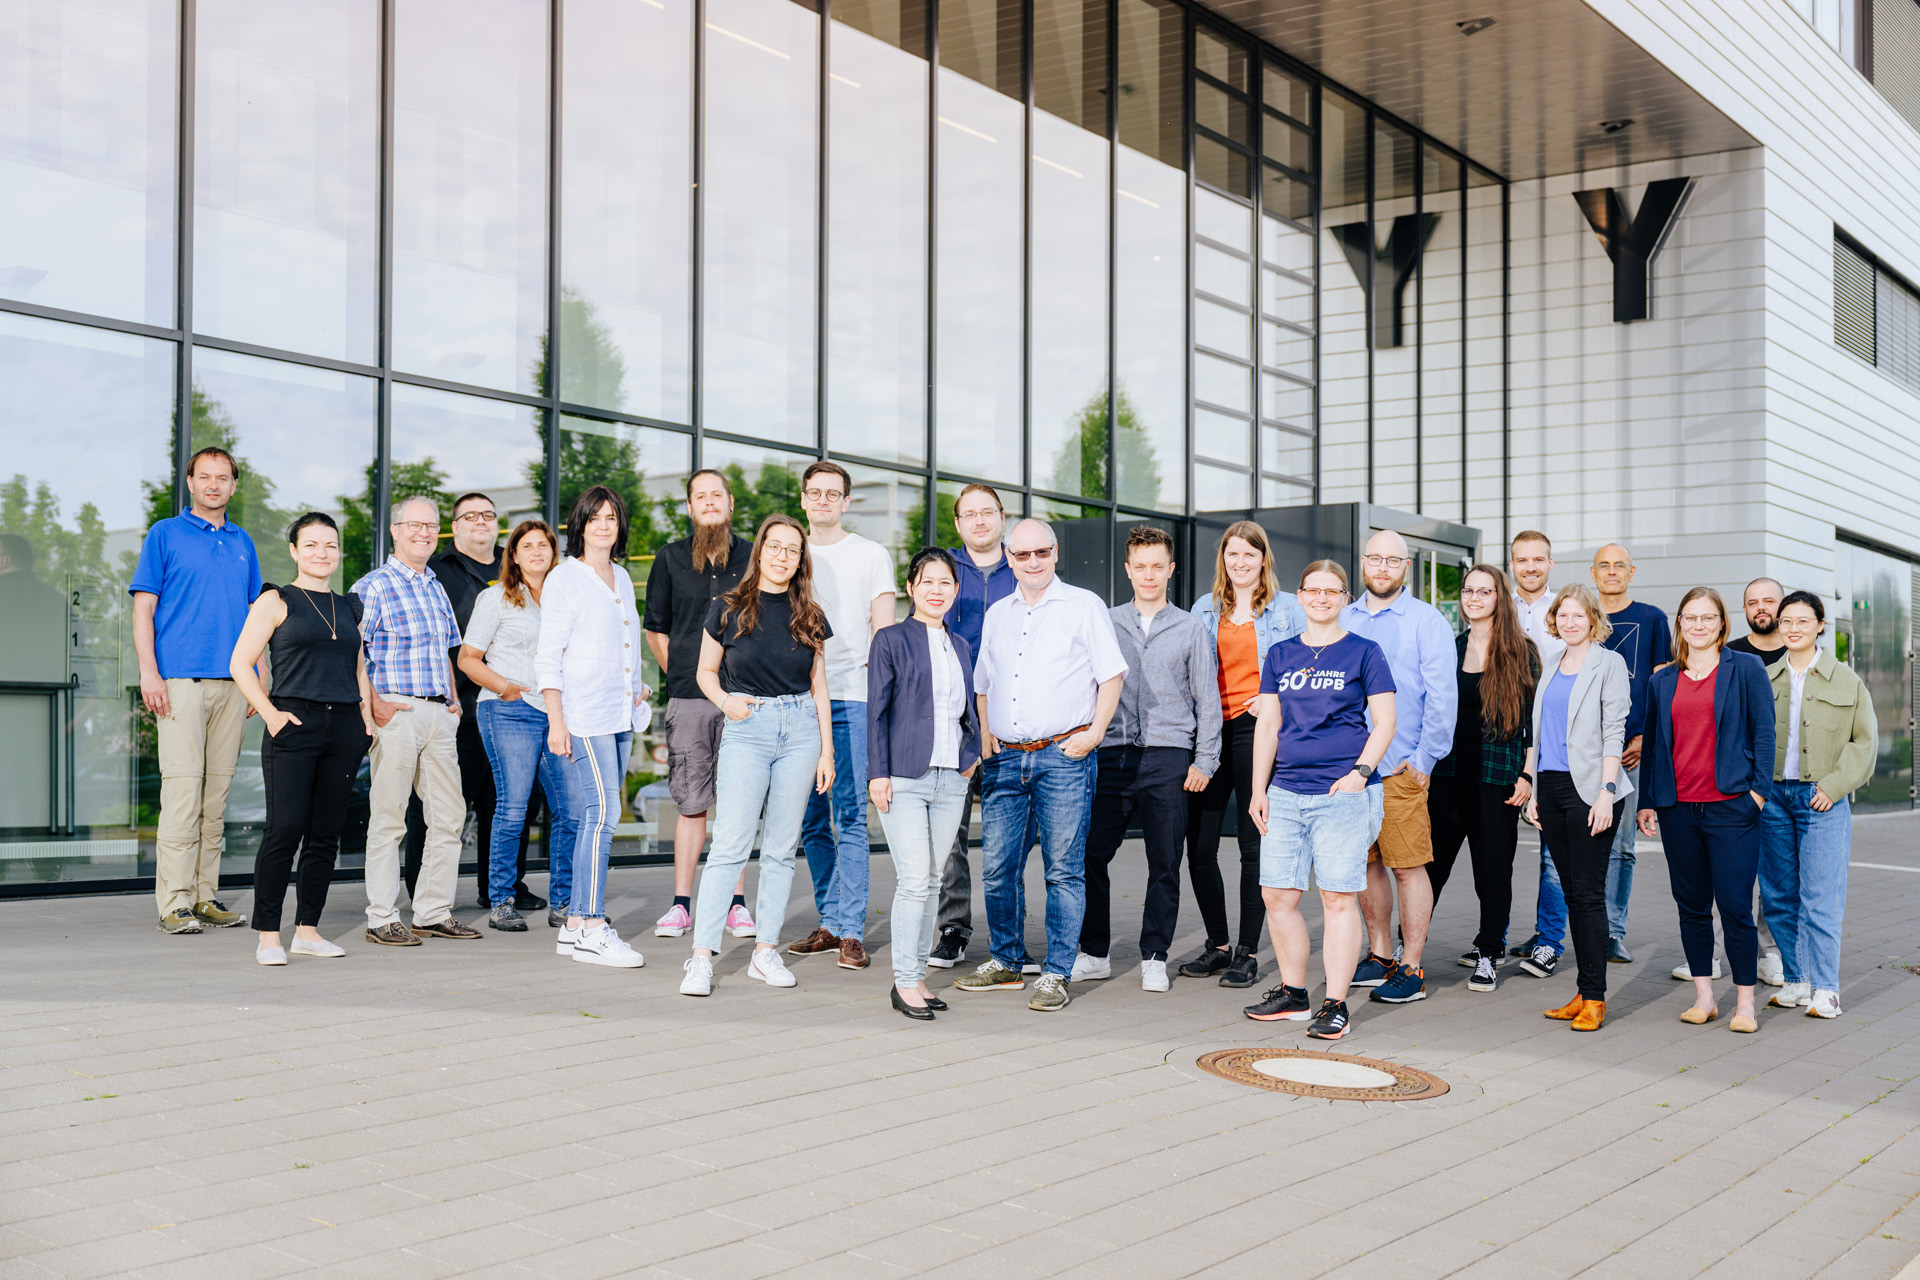 Group photo of the working group Coatings, Materials & Polymers in front of the new Y building at the Paderborn University (photographer Besim Mazhiqi)